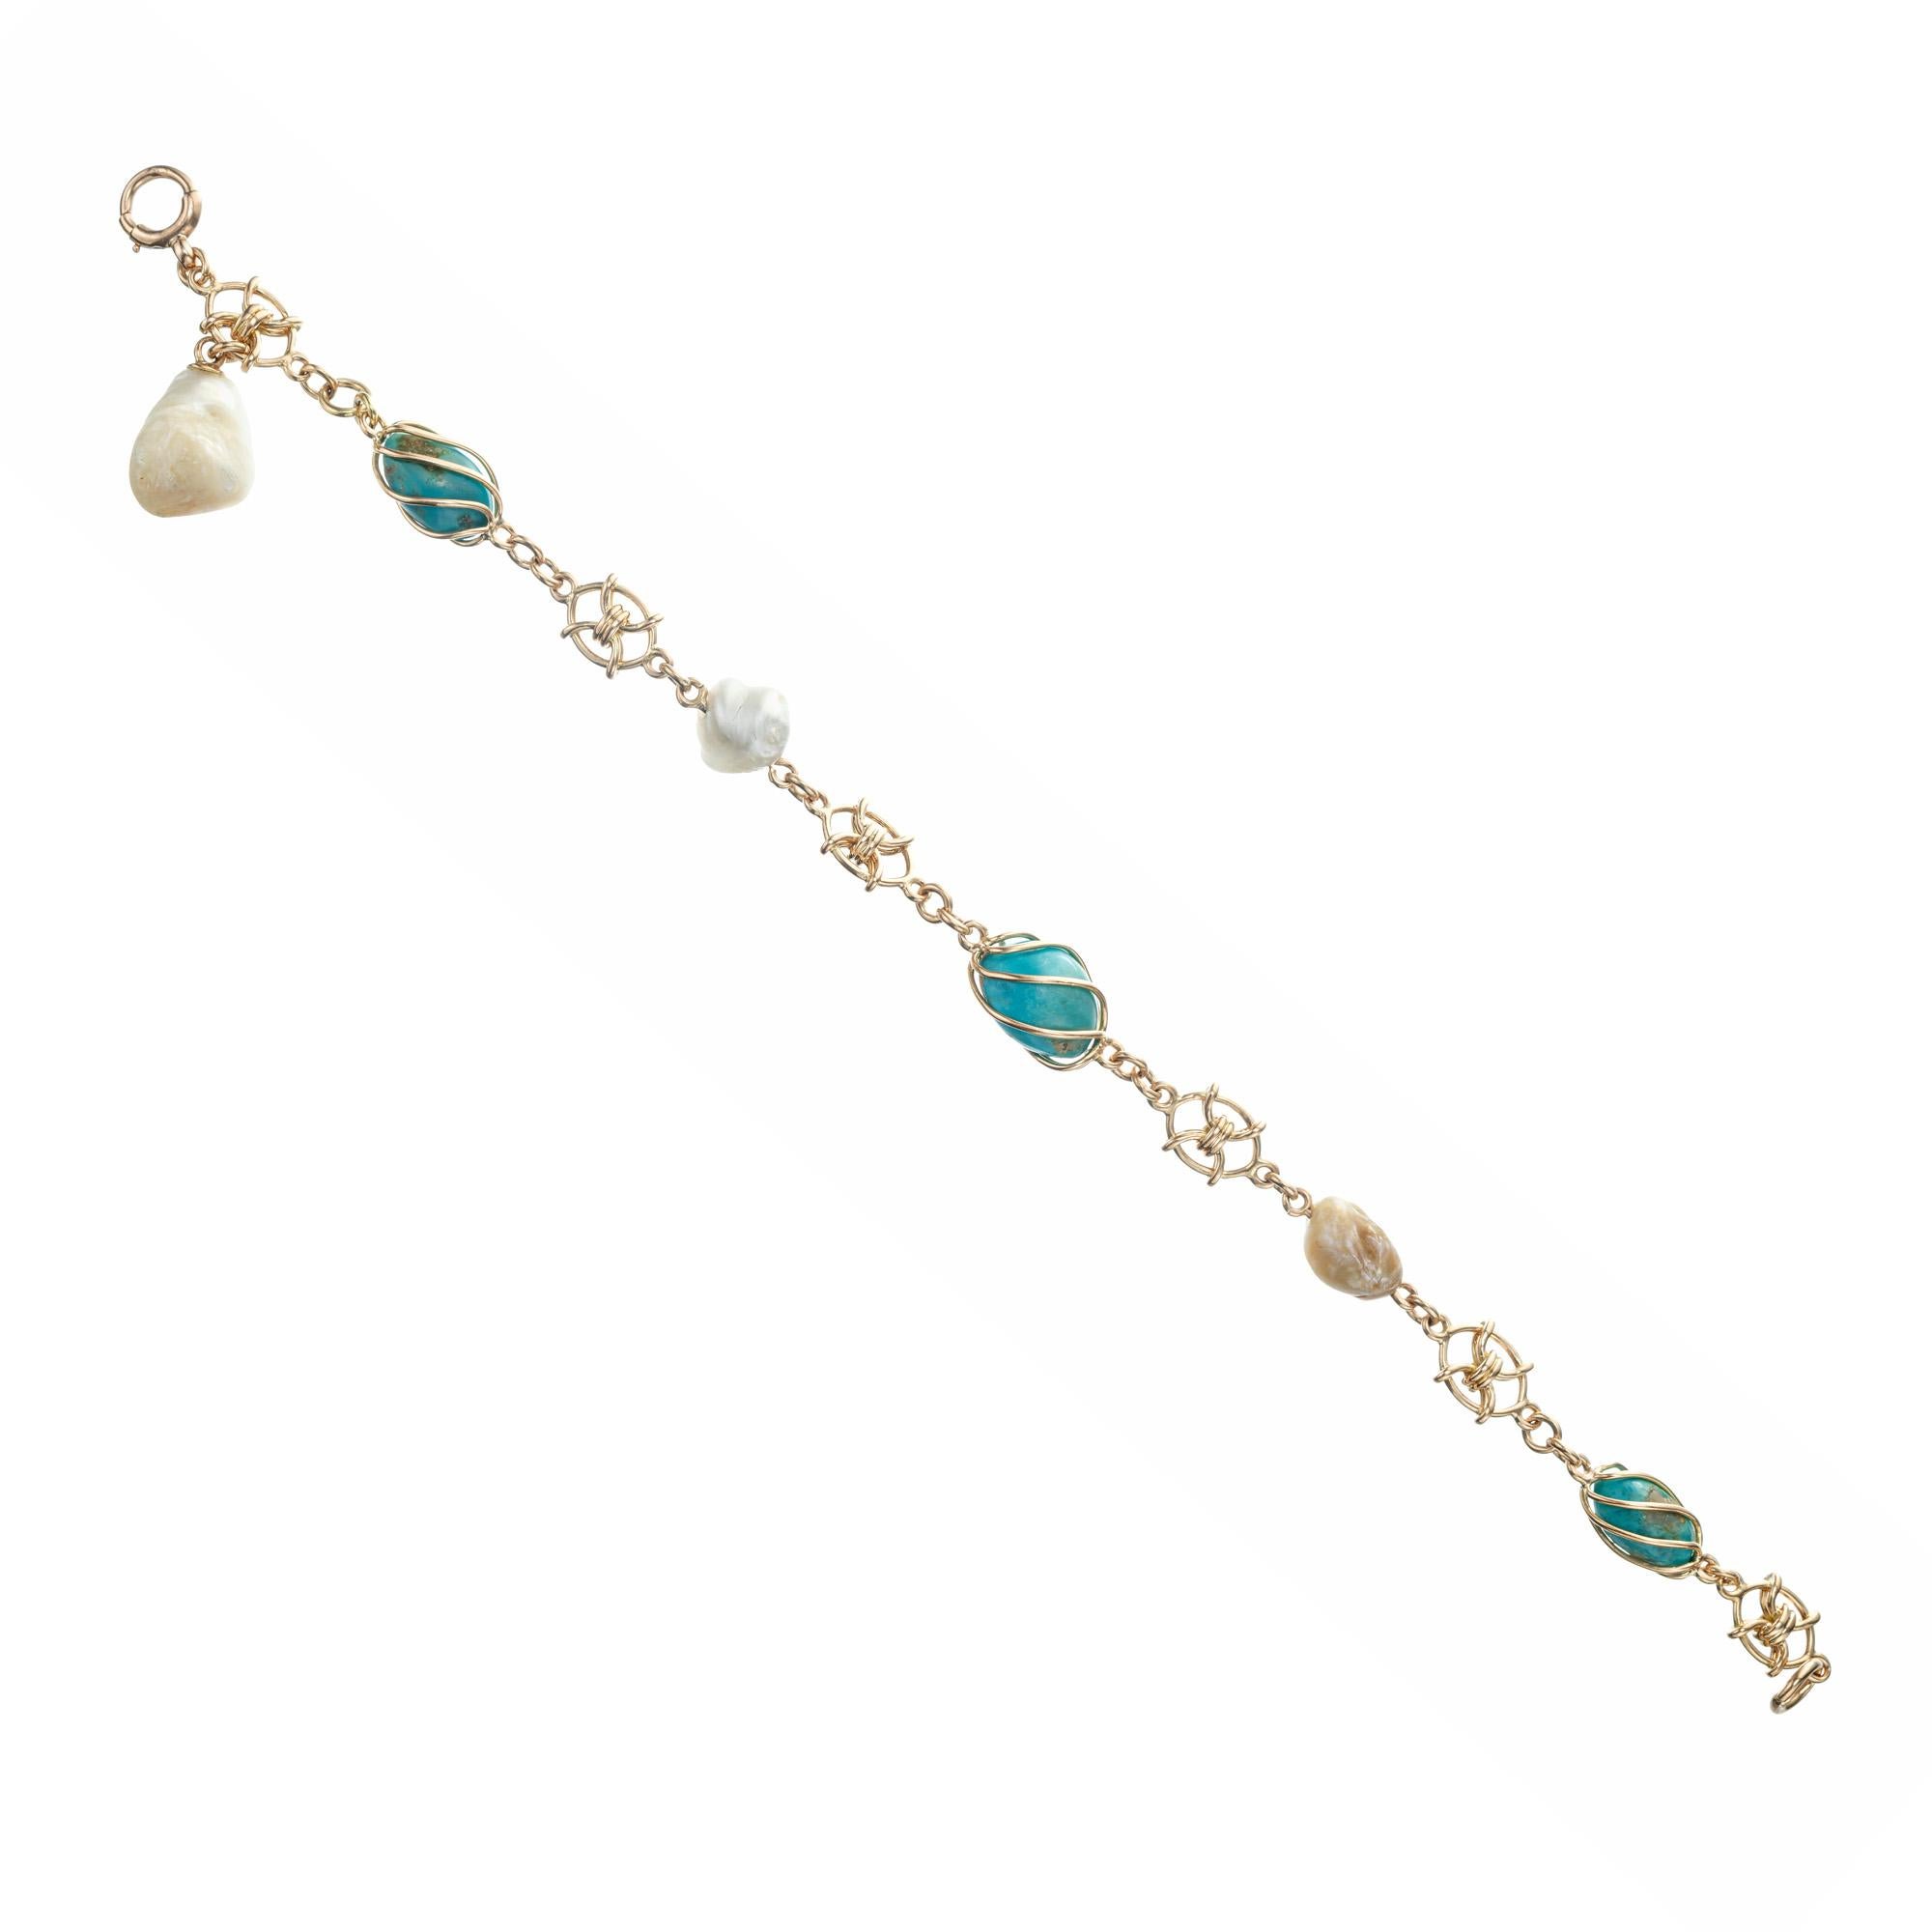 GIA certified Original American Arts & Crafts 1895 handmade 14k yellow gold bracelet with natural freshwater pearls and natural Turquoise. 8.25 inches in length. 

1 natural freshwater pearl, 11.0 x 8.66mm, GIA certificate #2175433383
2 natural